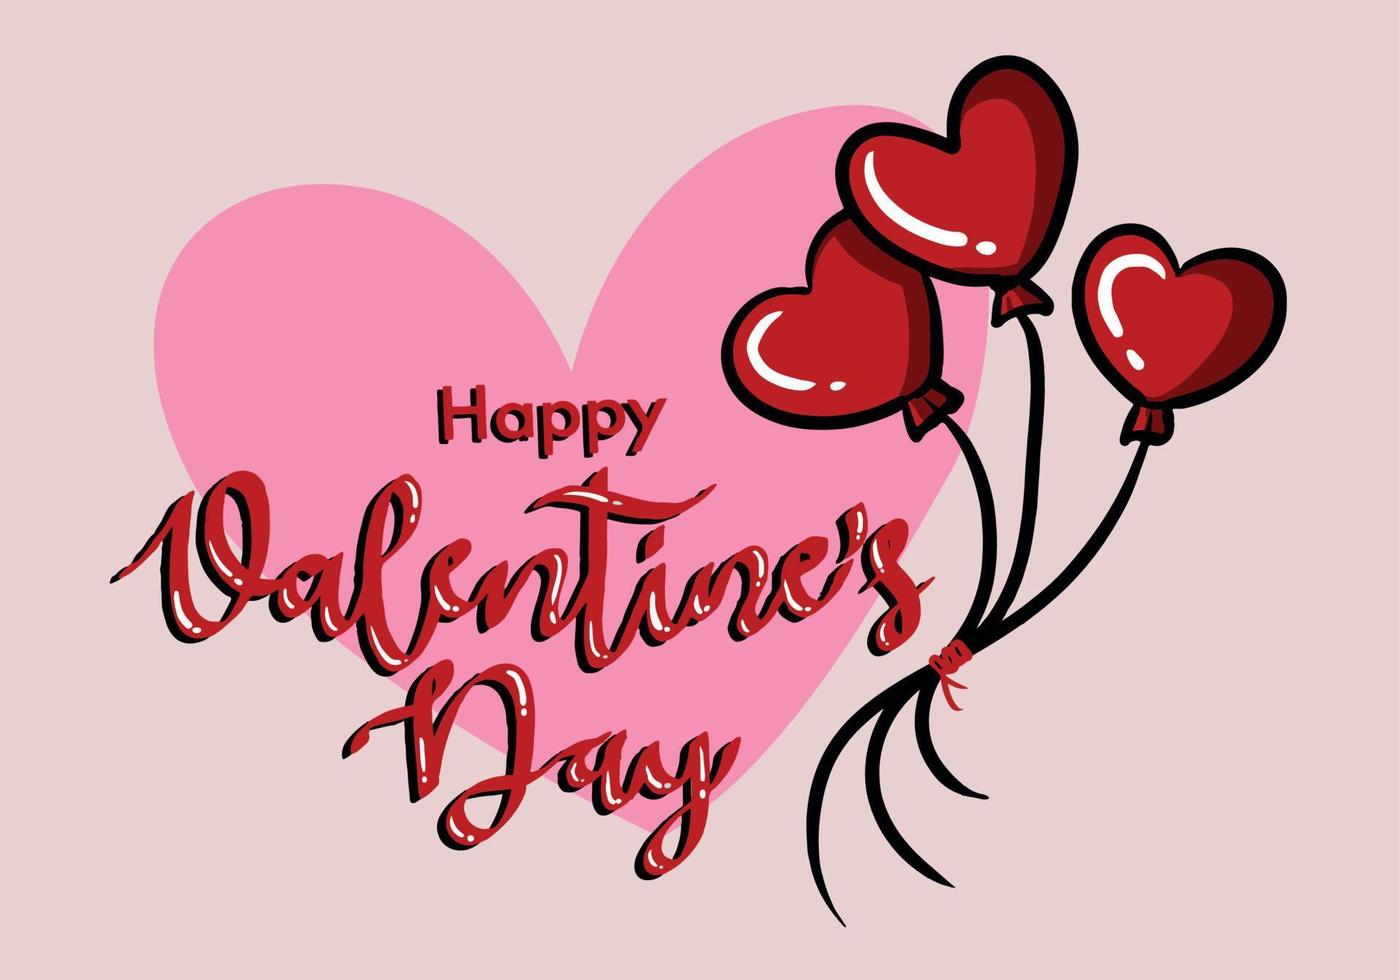 Happy Valentine's Day Vector Design. Valentine's Day Vector With cute heart shape balloons. Valentine's Day Design for Poster, Social Media, Banner or Advertisement.